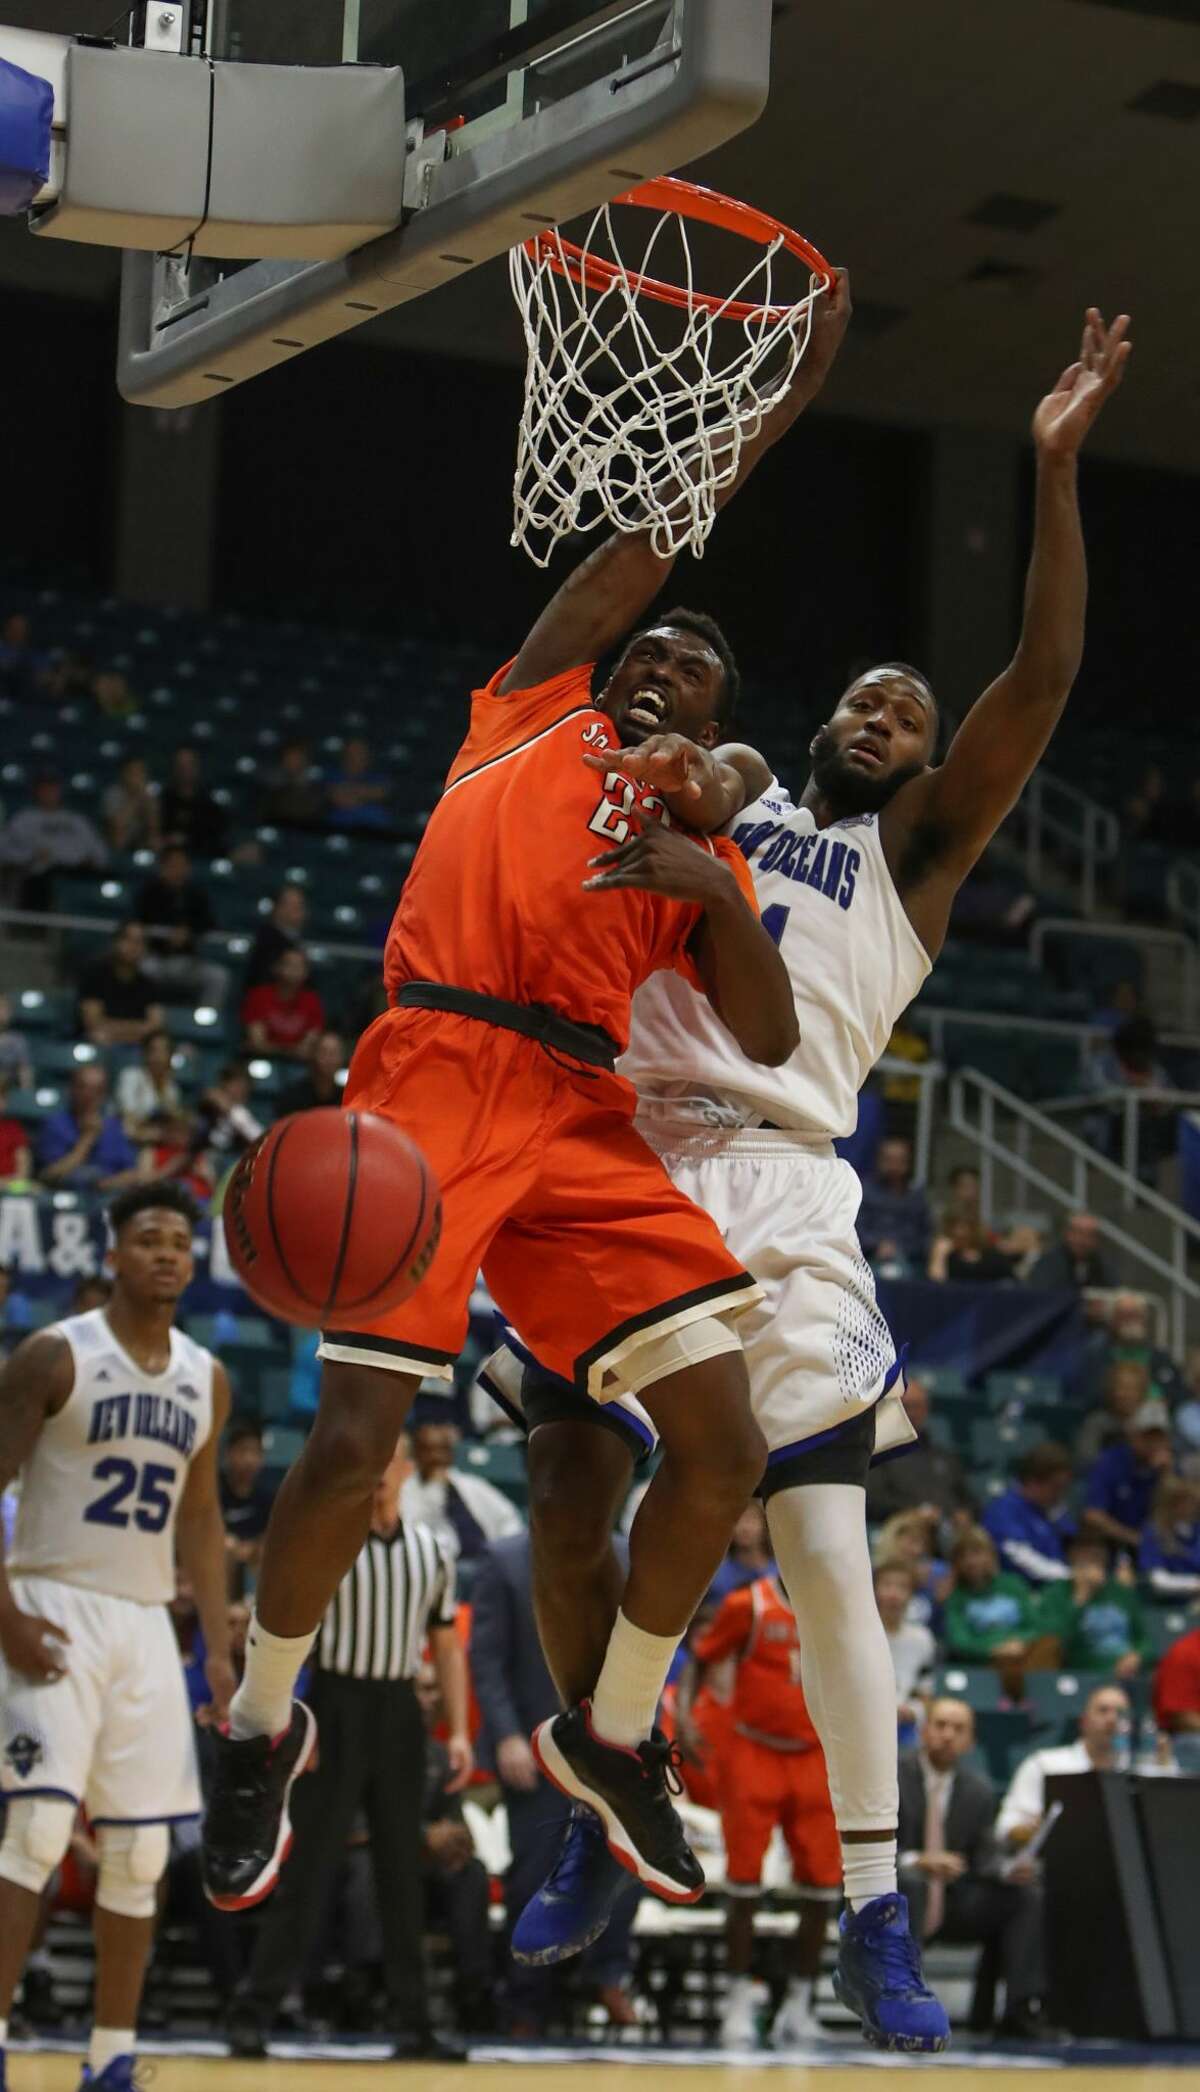 Sam Houston State forward Christopher Galbreath Jr. (23) has his shot knocked down by New Orleans guard Michael Zeno (11) during second-half action in The Southland Conference Basketball Tournament in the Leonard E. Merrell Center Friday, March 10, 2017, in Katy. ( Steve Gonzales / Houston Chronicle )